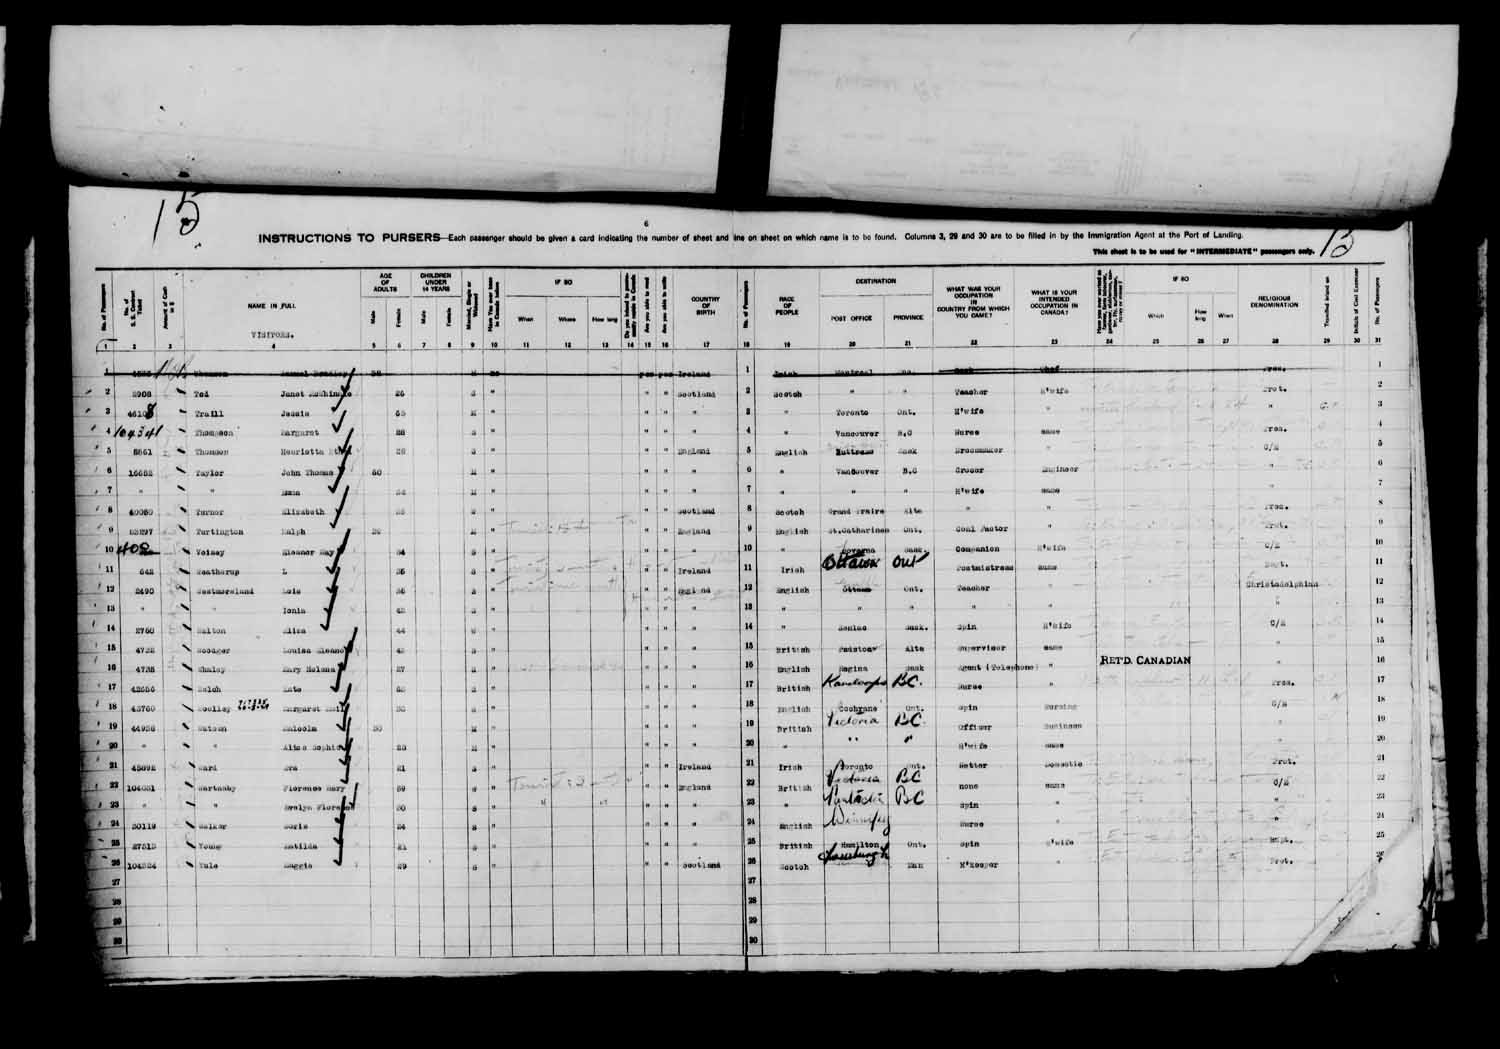 Digitized page of Passenger Lists for Image No.: e003610622